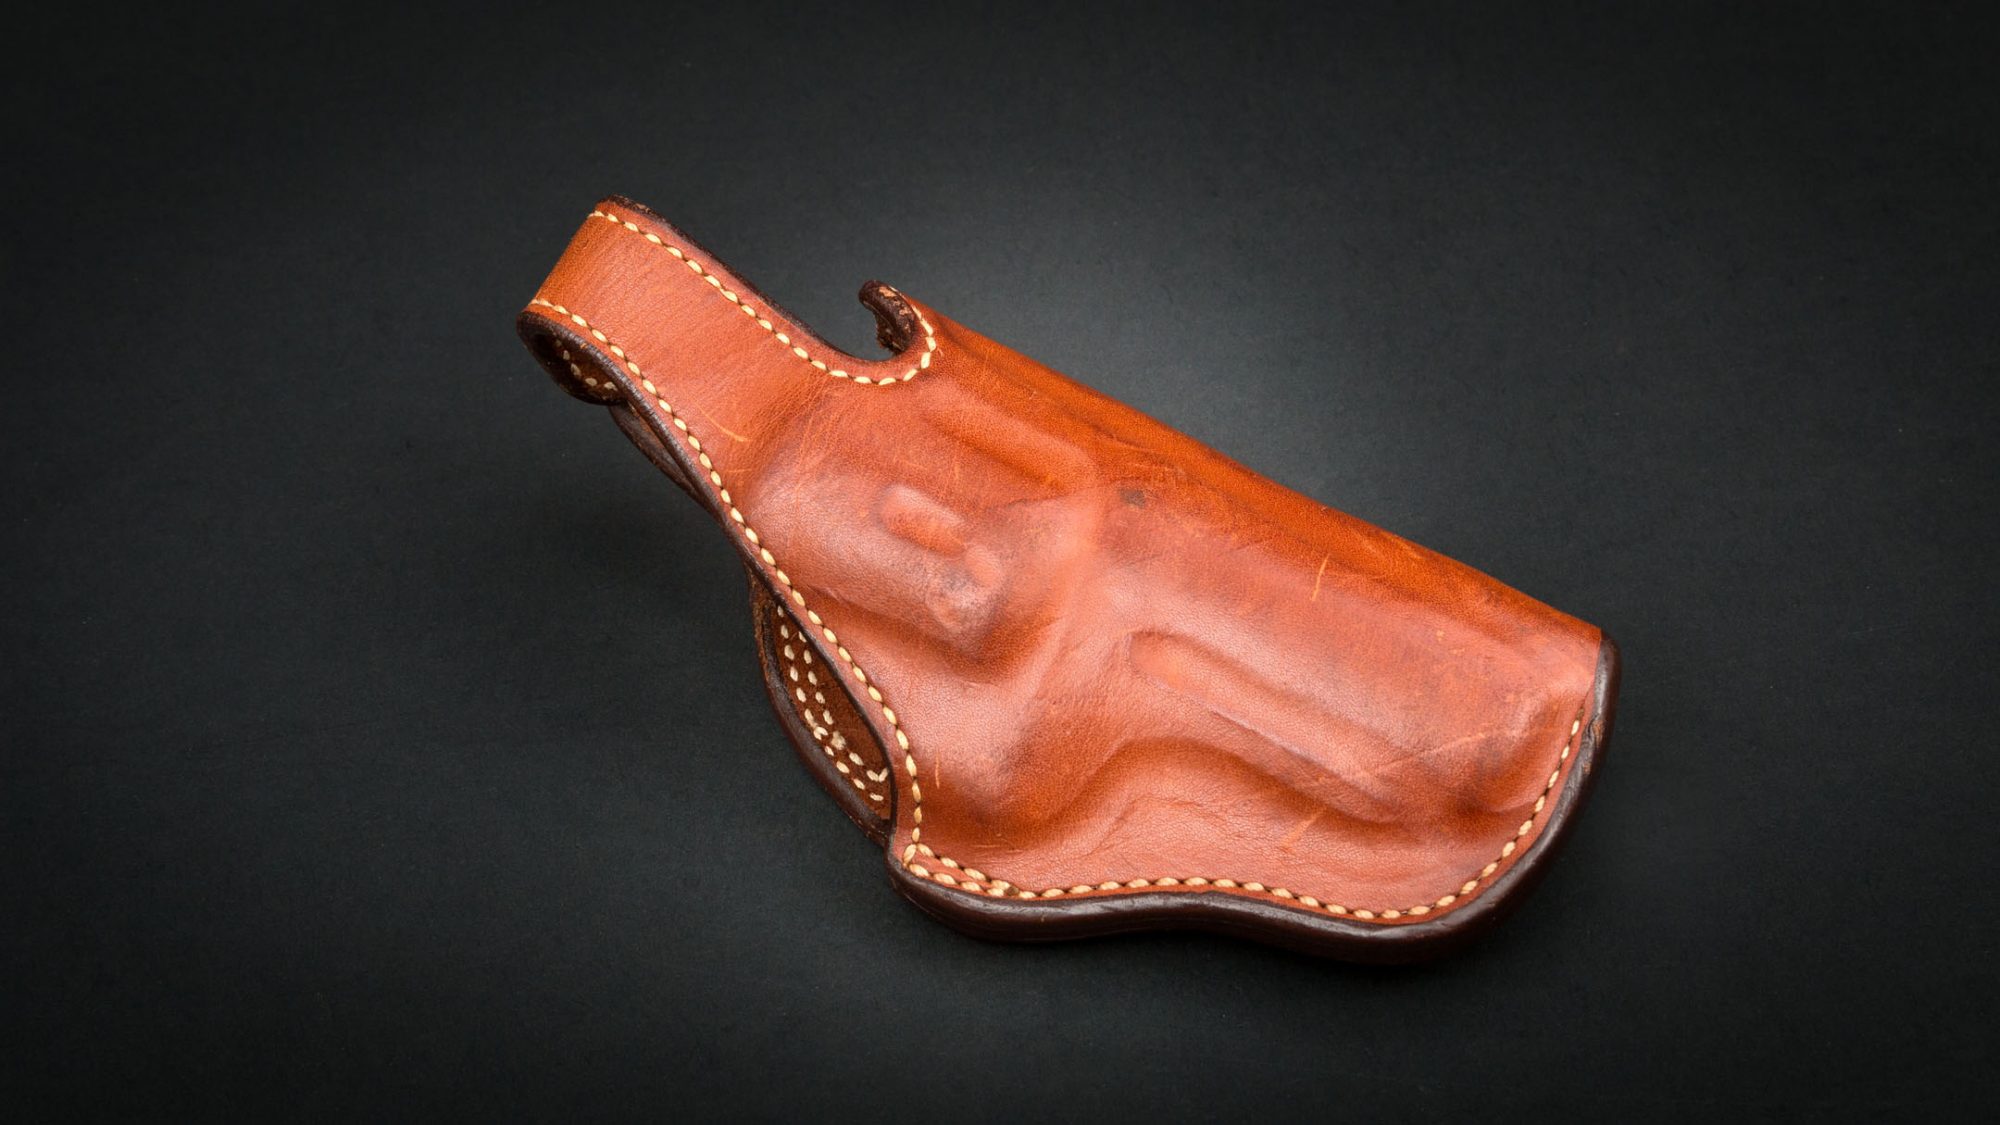 Dan Wesson Model 15-2 revolver holster, for sale by Turnbull Restoration of Bloomfield, NY